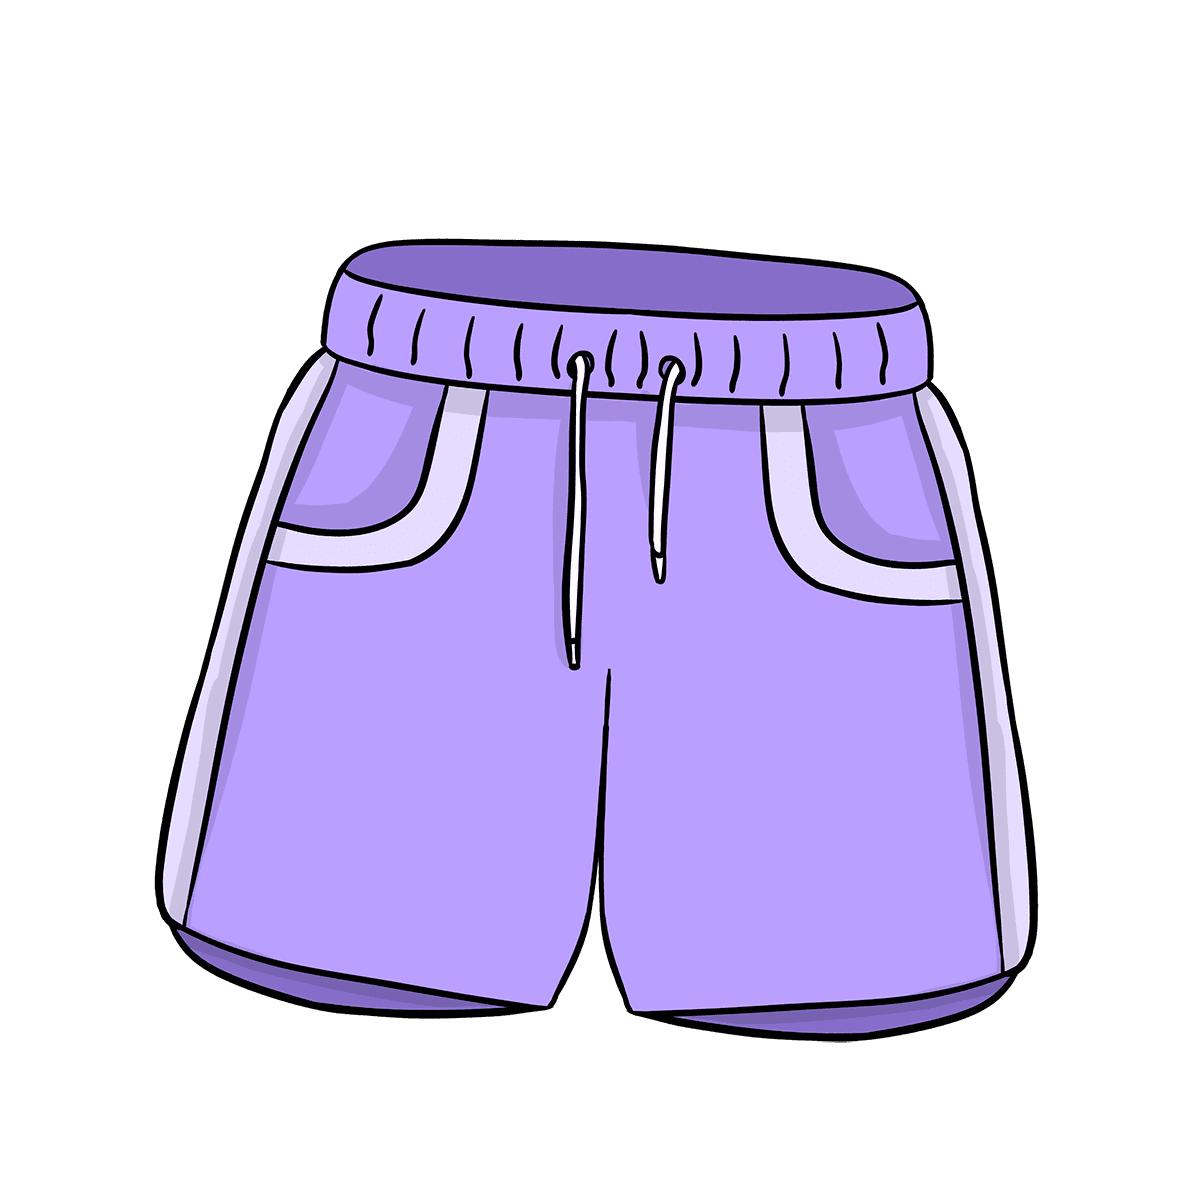 Shorts Clipart Free Images